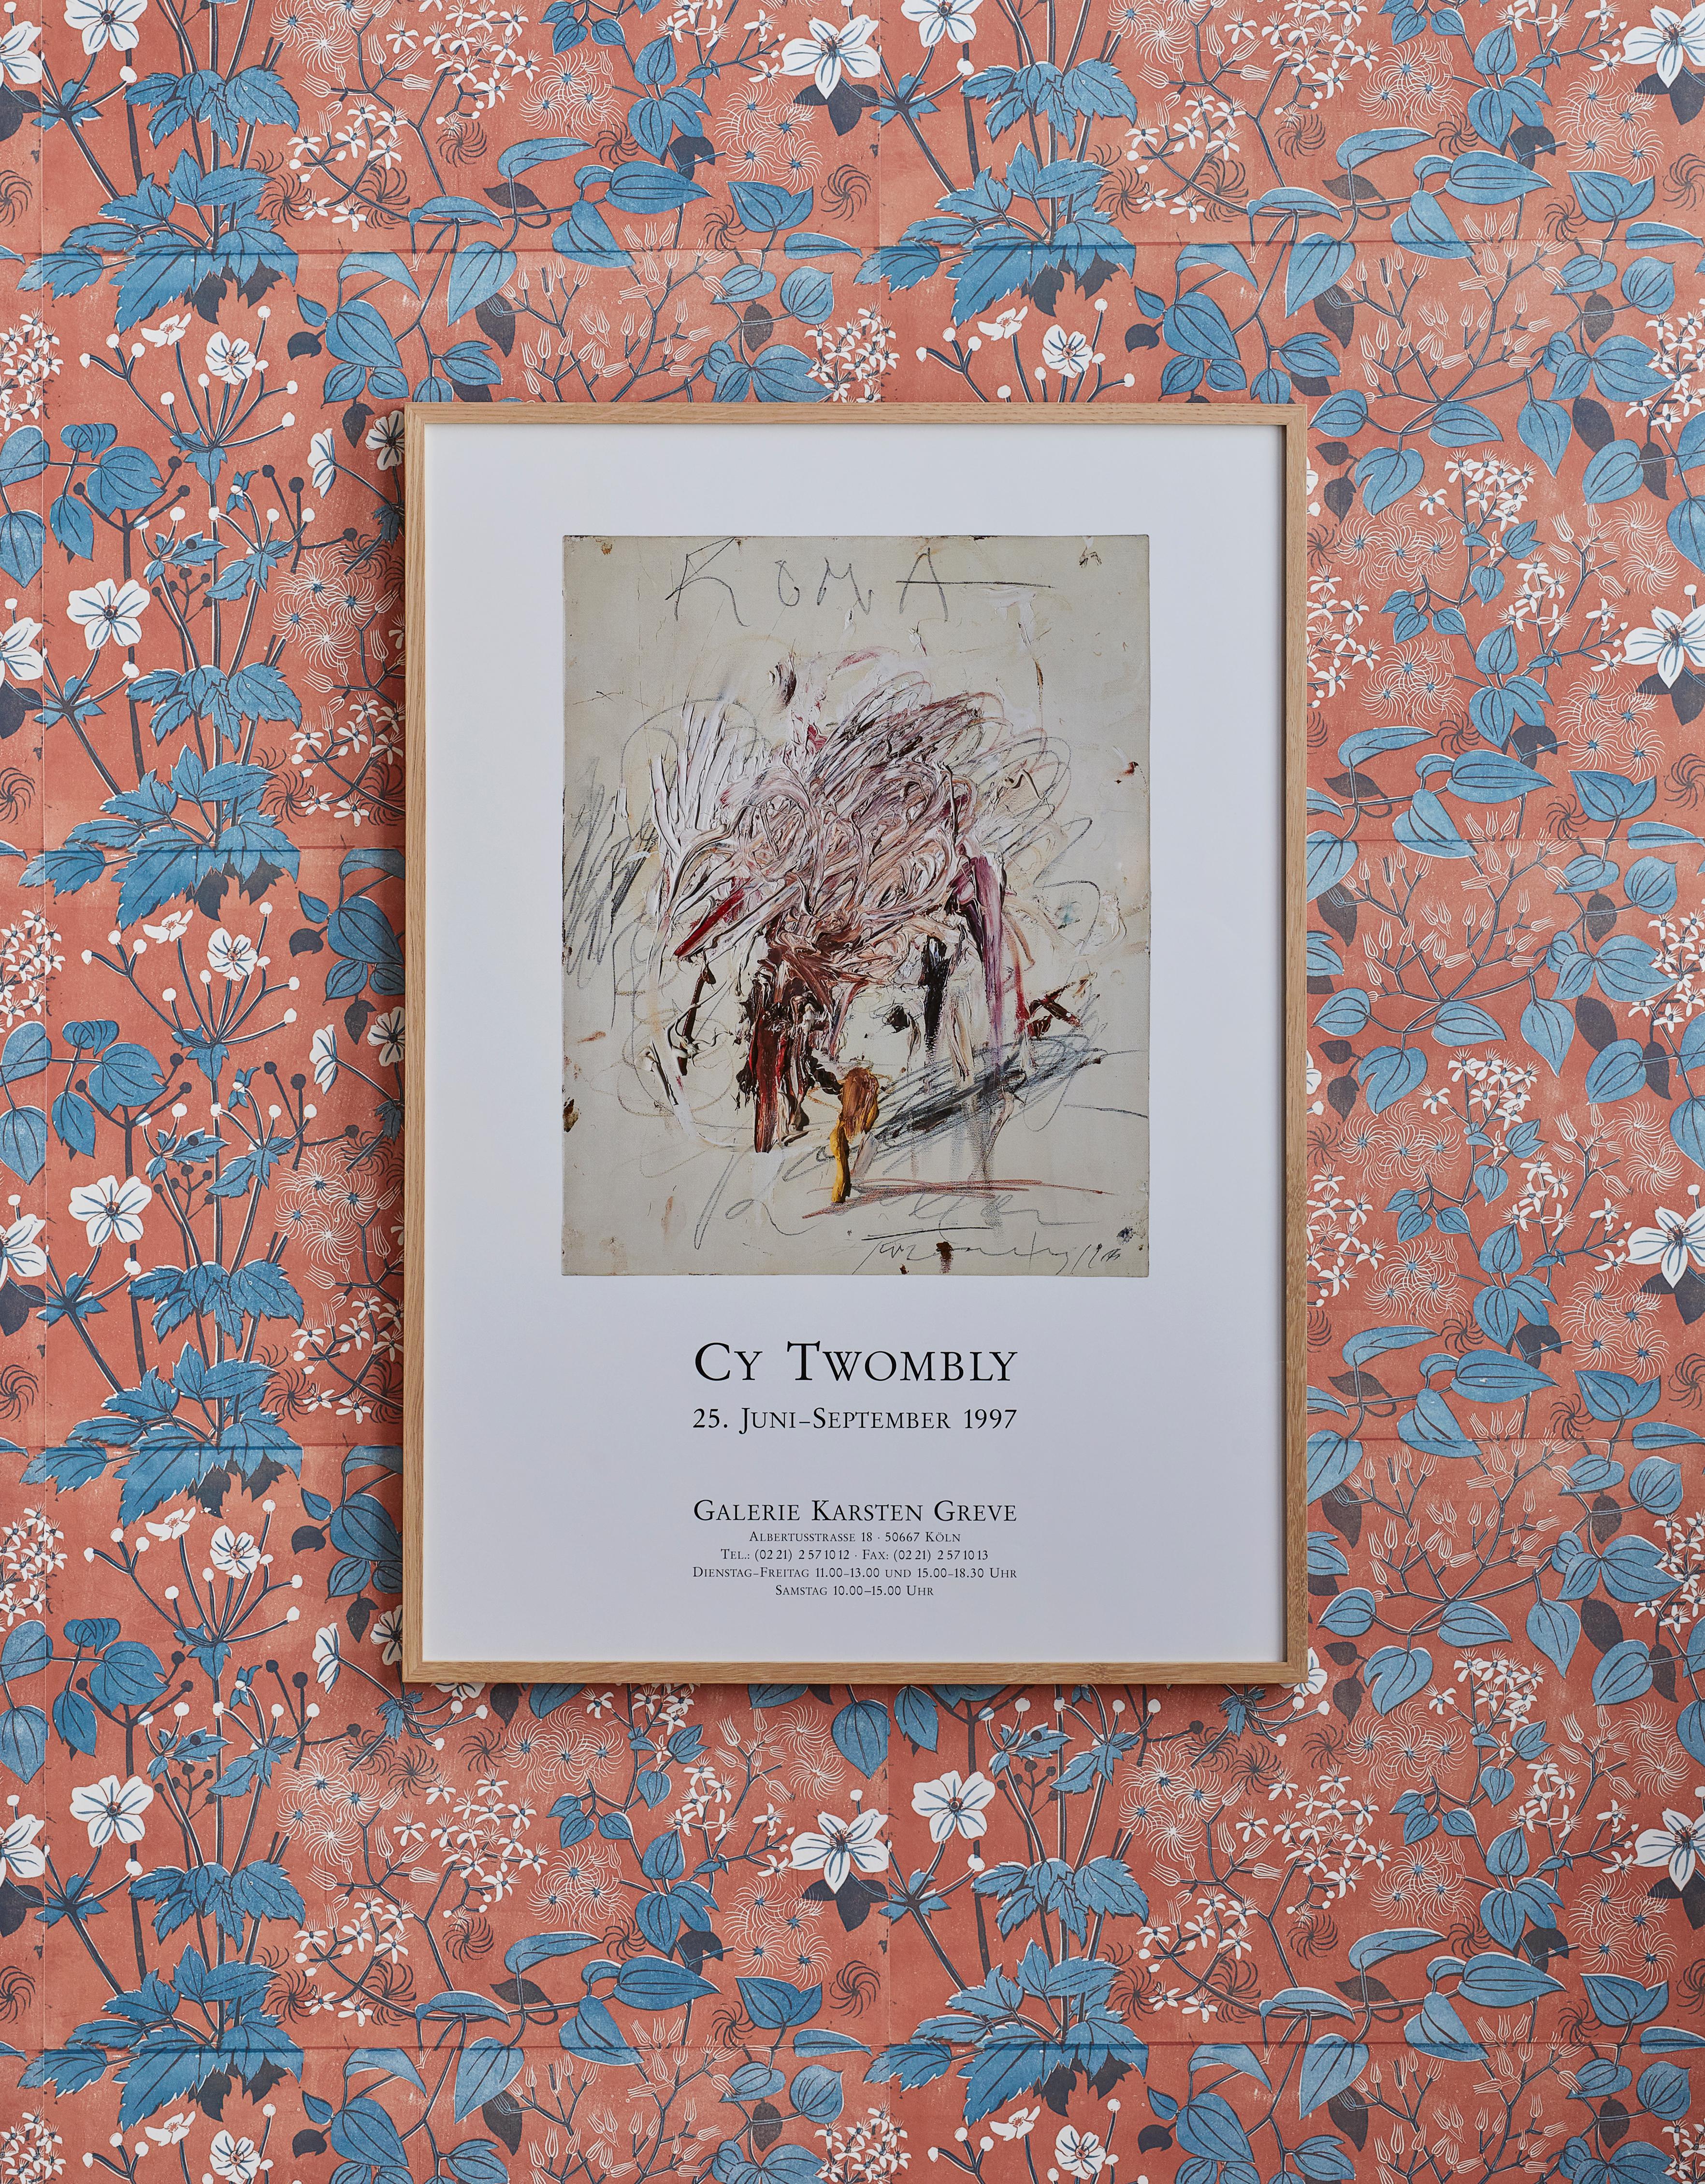 Cy Twombly
Germany, 1997

“Cy Twombly” Galerie Karsten Greve. Vintage exhibition poster.

Measures: H 86 x W 61 x D 2.5 cm.
 